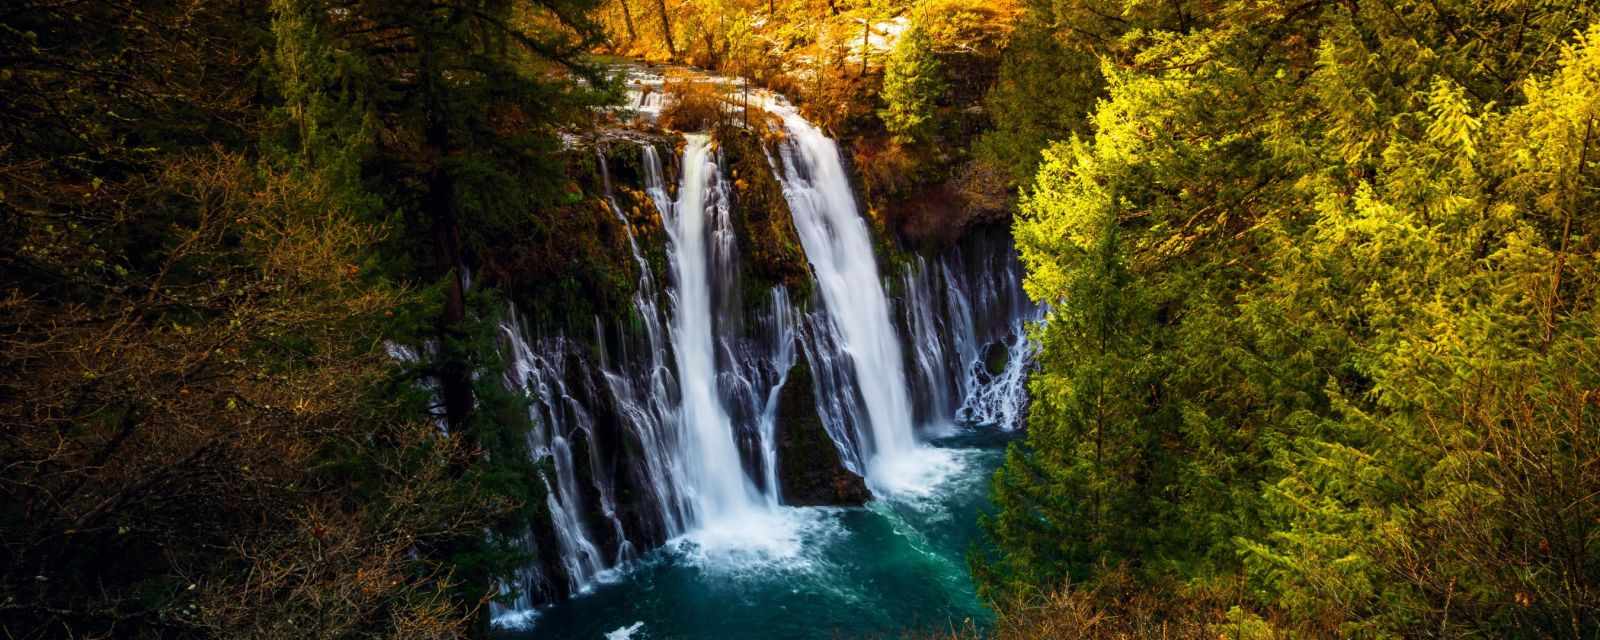 McArthur Burney Falls Season Guide - Camping, Trails and 5 Facts